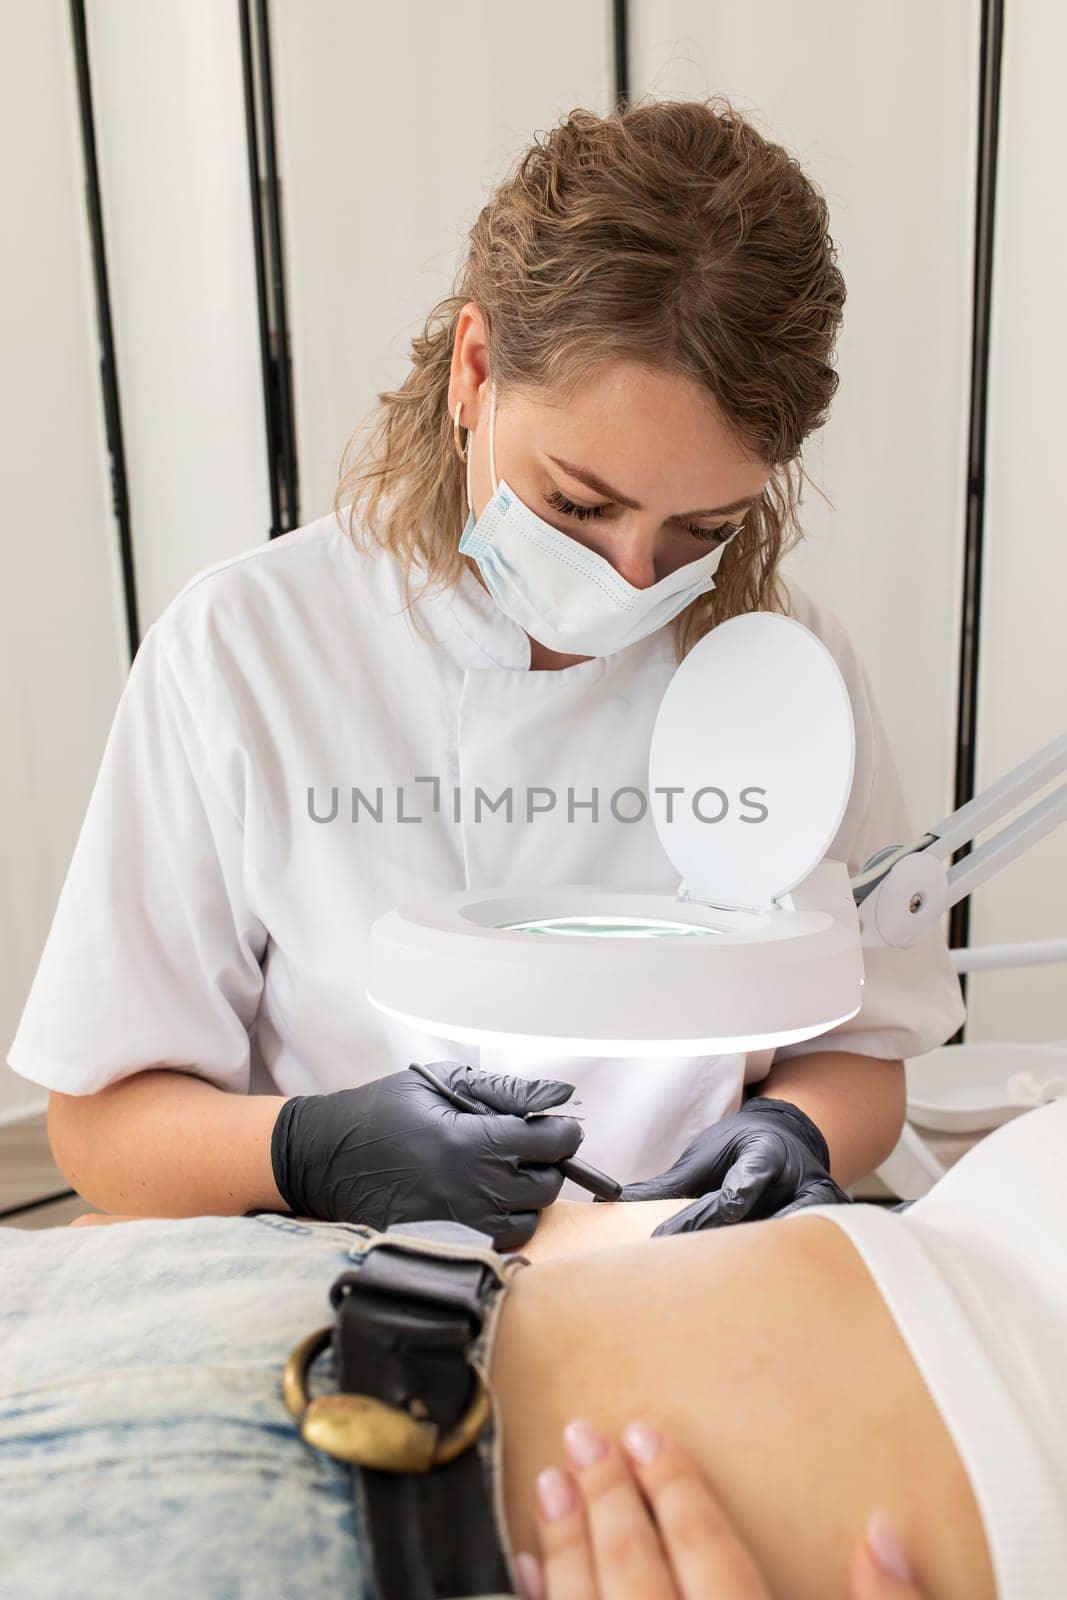 Hair Removal Process With Electrolysis On Hand Of White Young Woman, Cosmetologist Does Electric Epilation In Beauty Salon. Vertical Plane. Authentic High quality photo